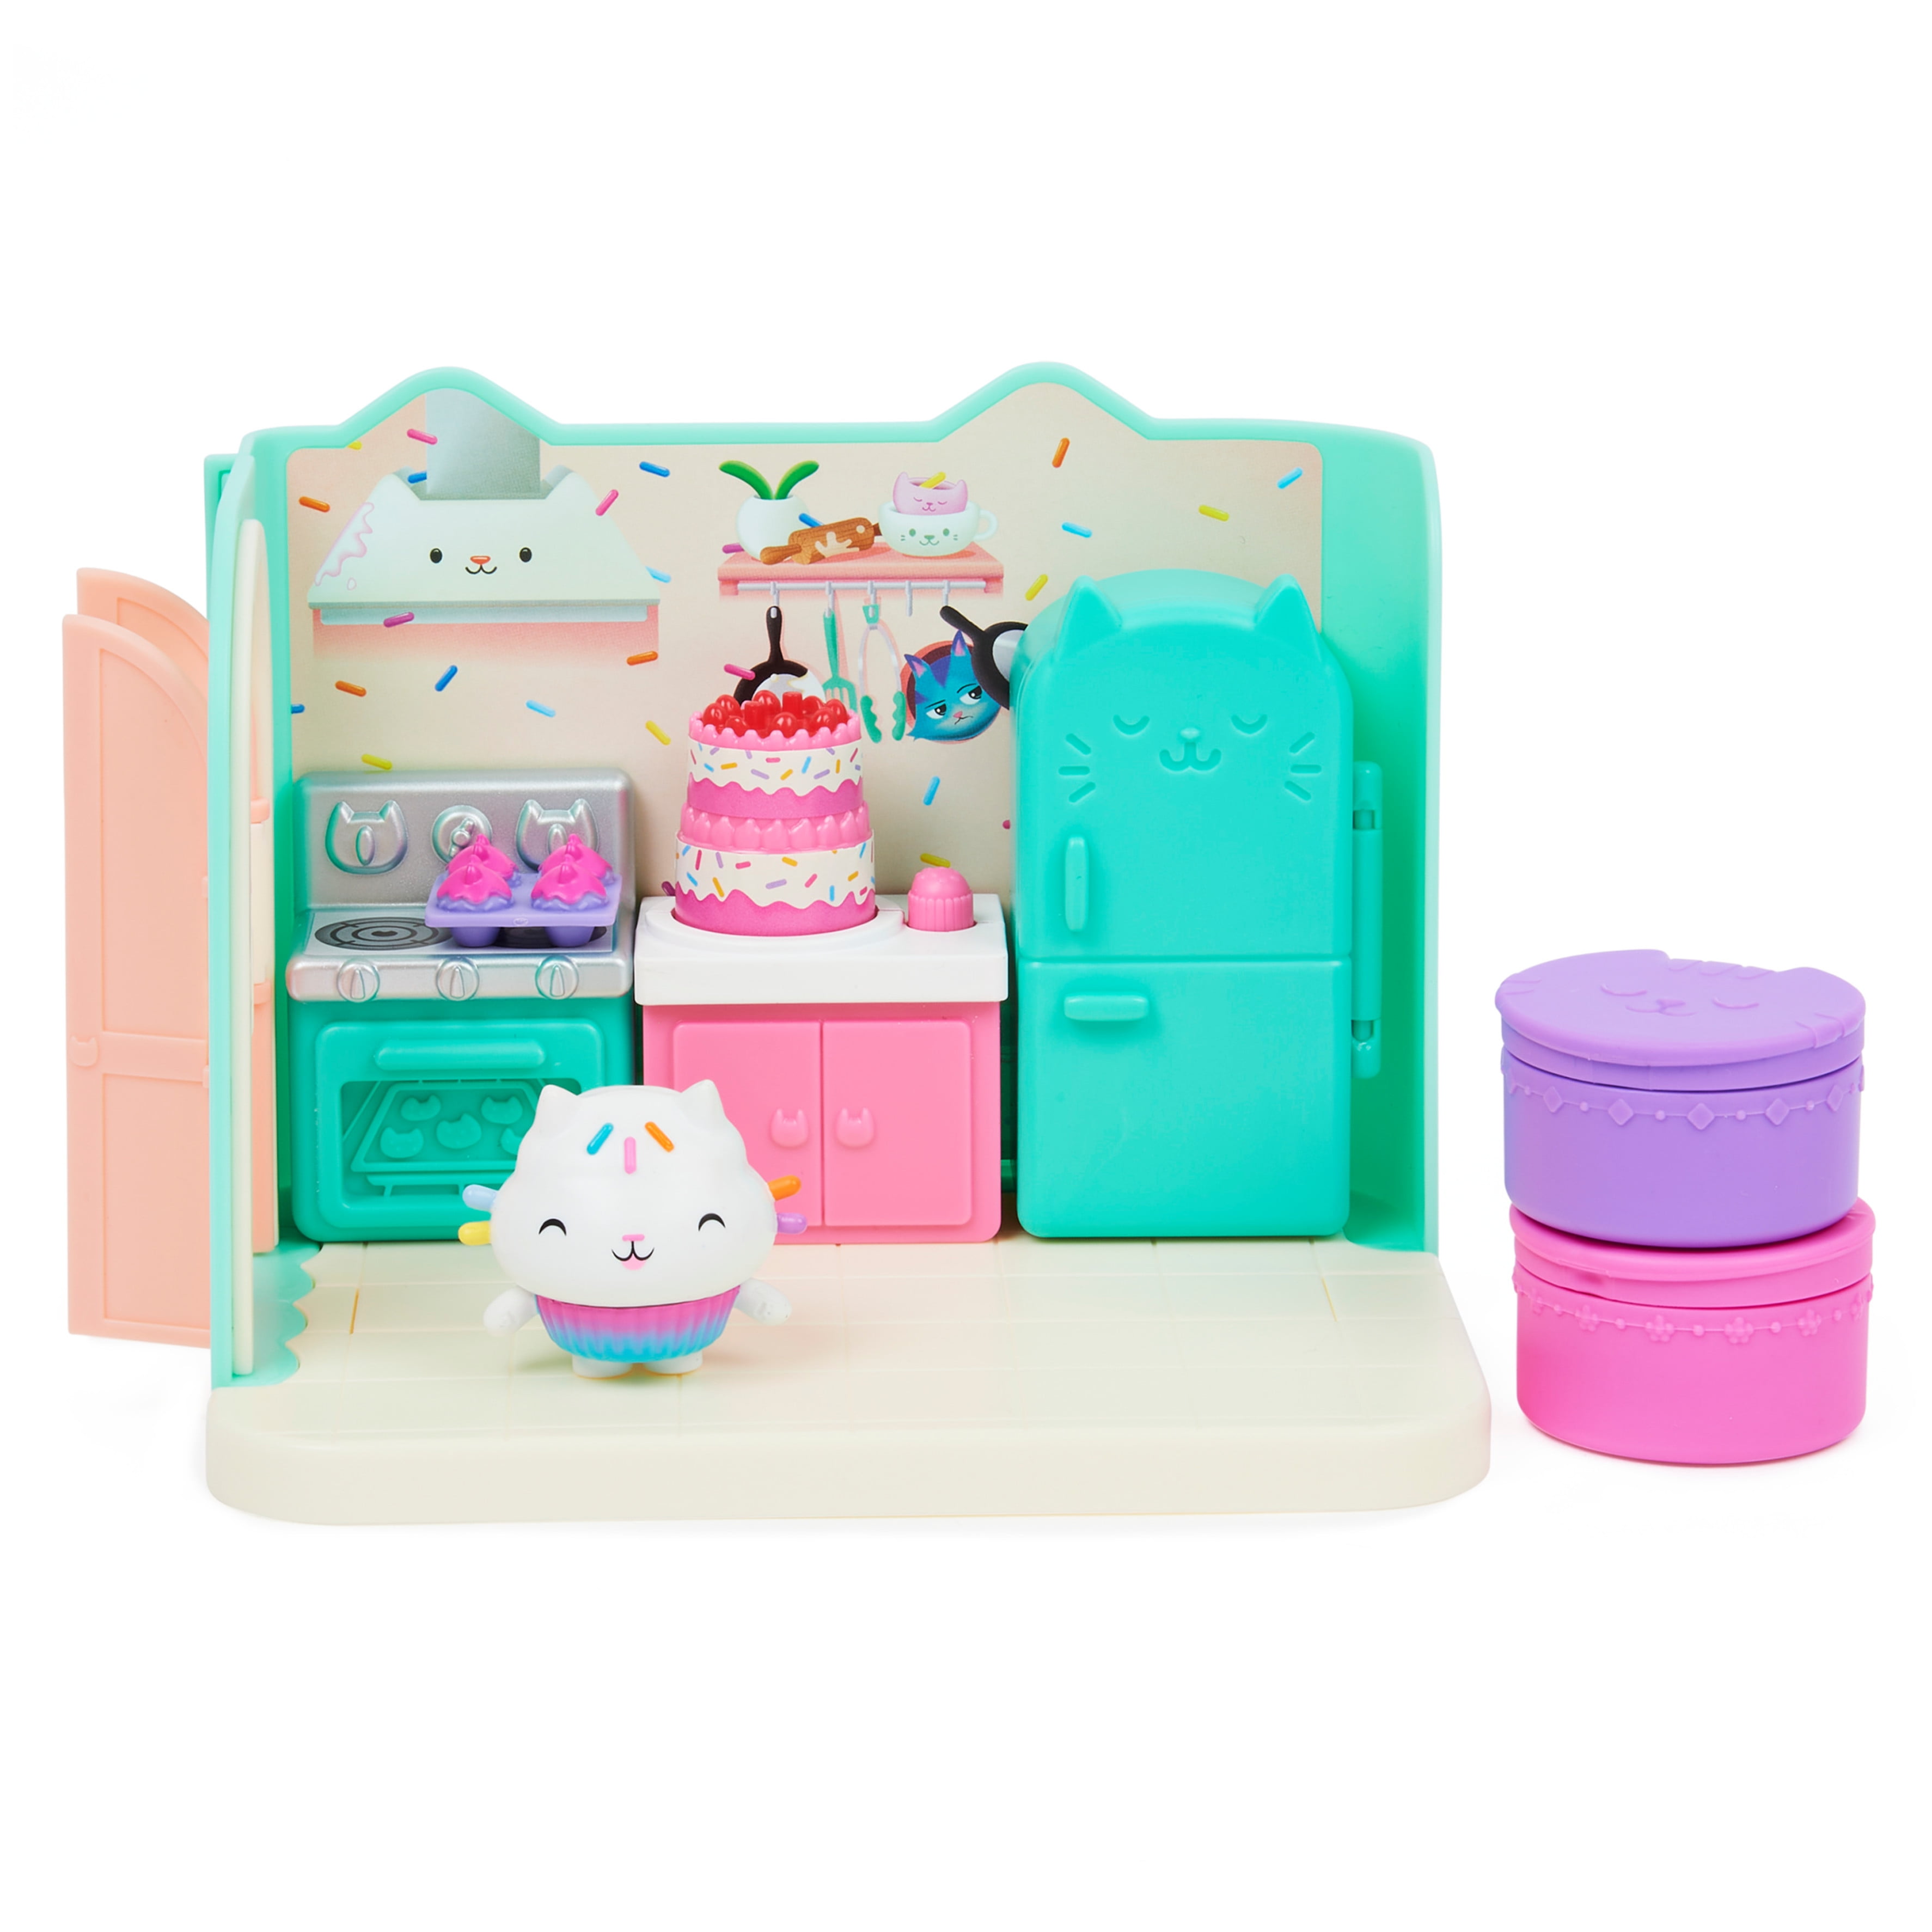 Gabby's Dollhouse Gabby’s Dollhouse, Bakey with Cakey Kitchen Playset with Figure, for Ages 3 and up